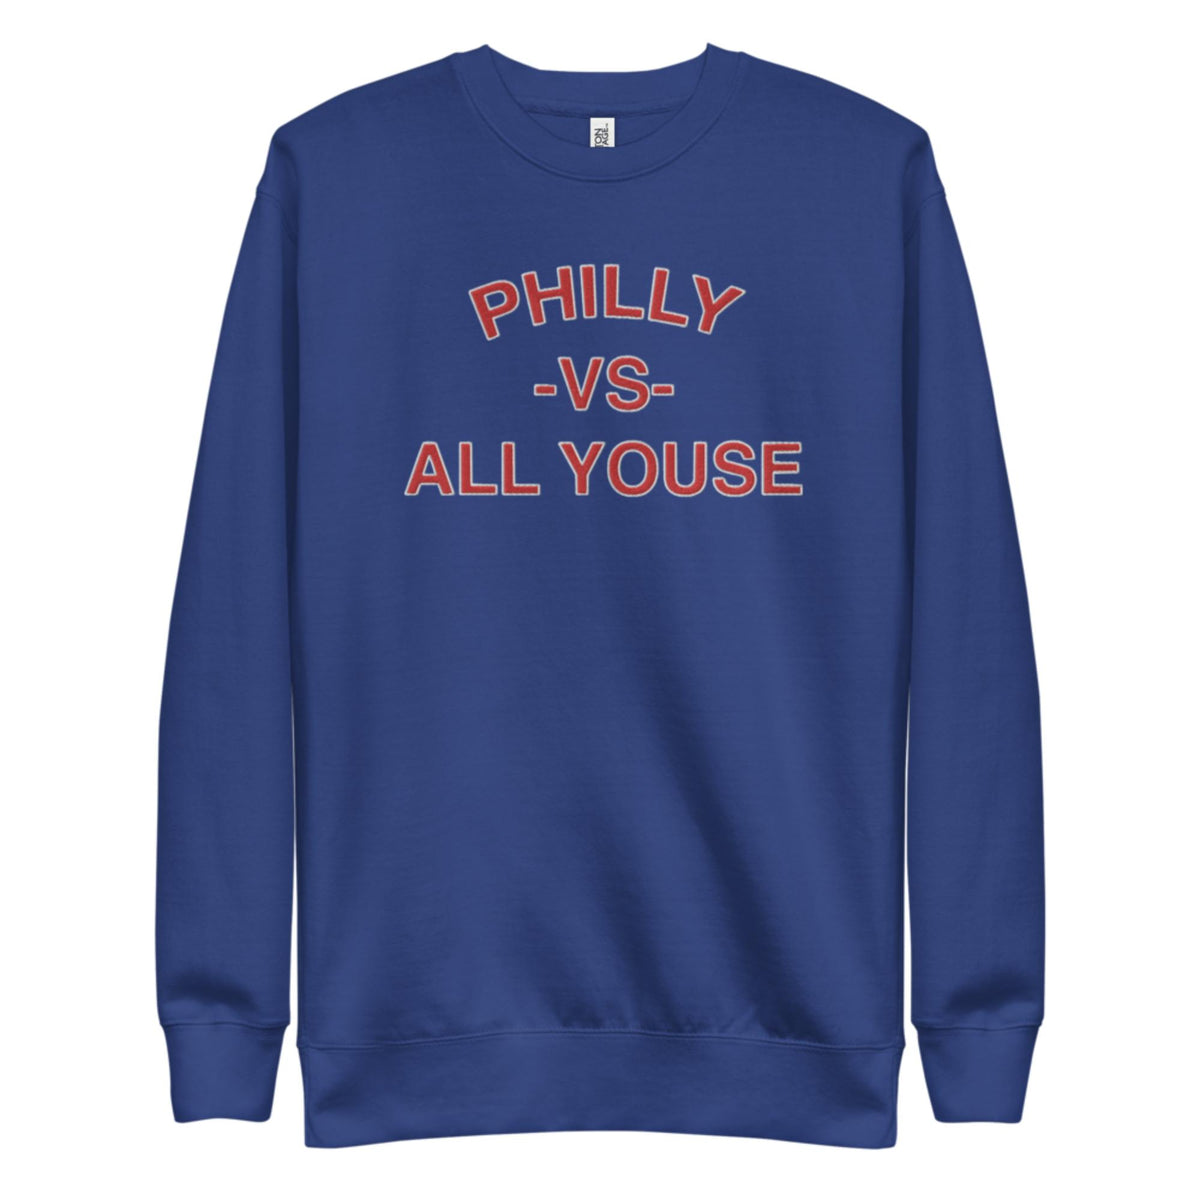 &quot;Philly vs. All Youse&quot; Embroidered Sweatshirt